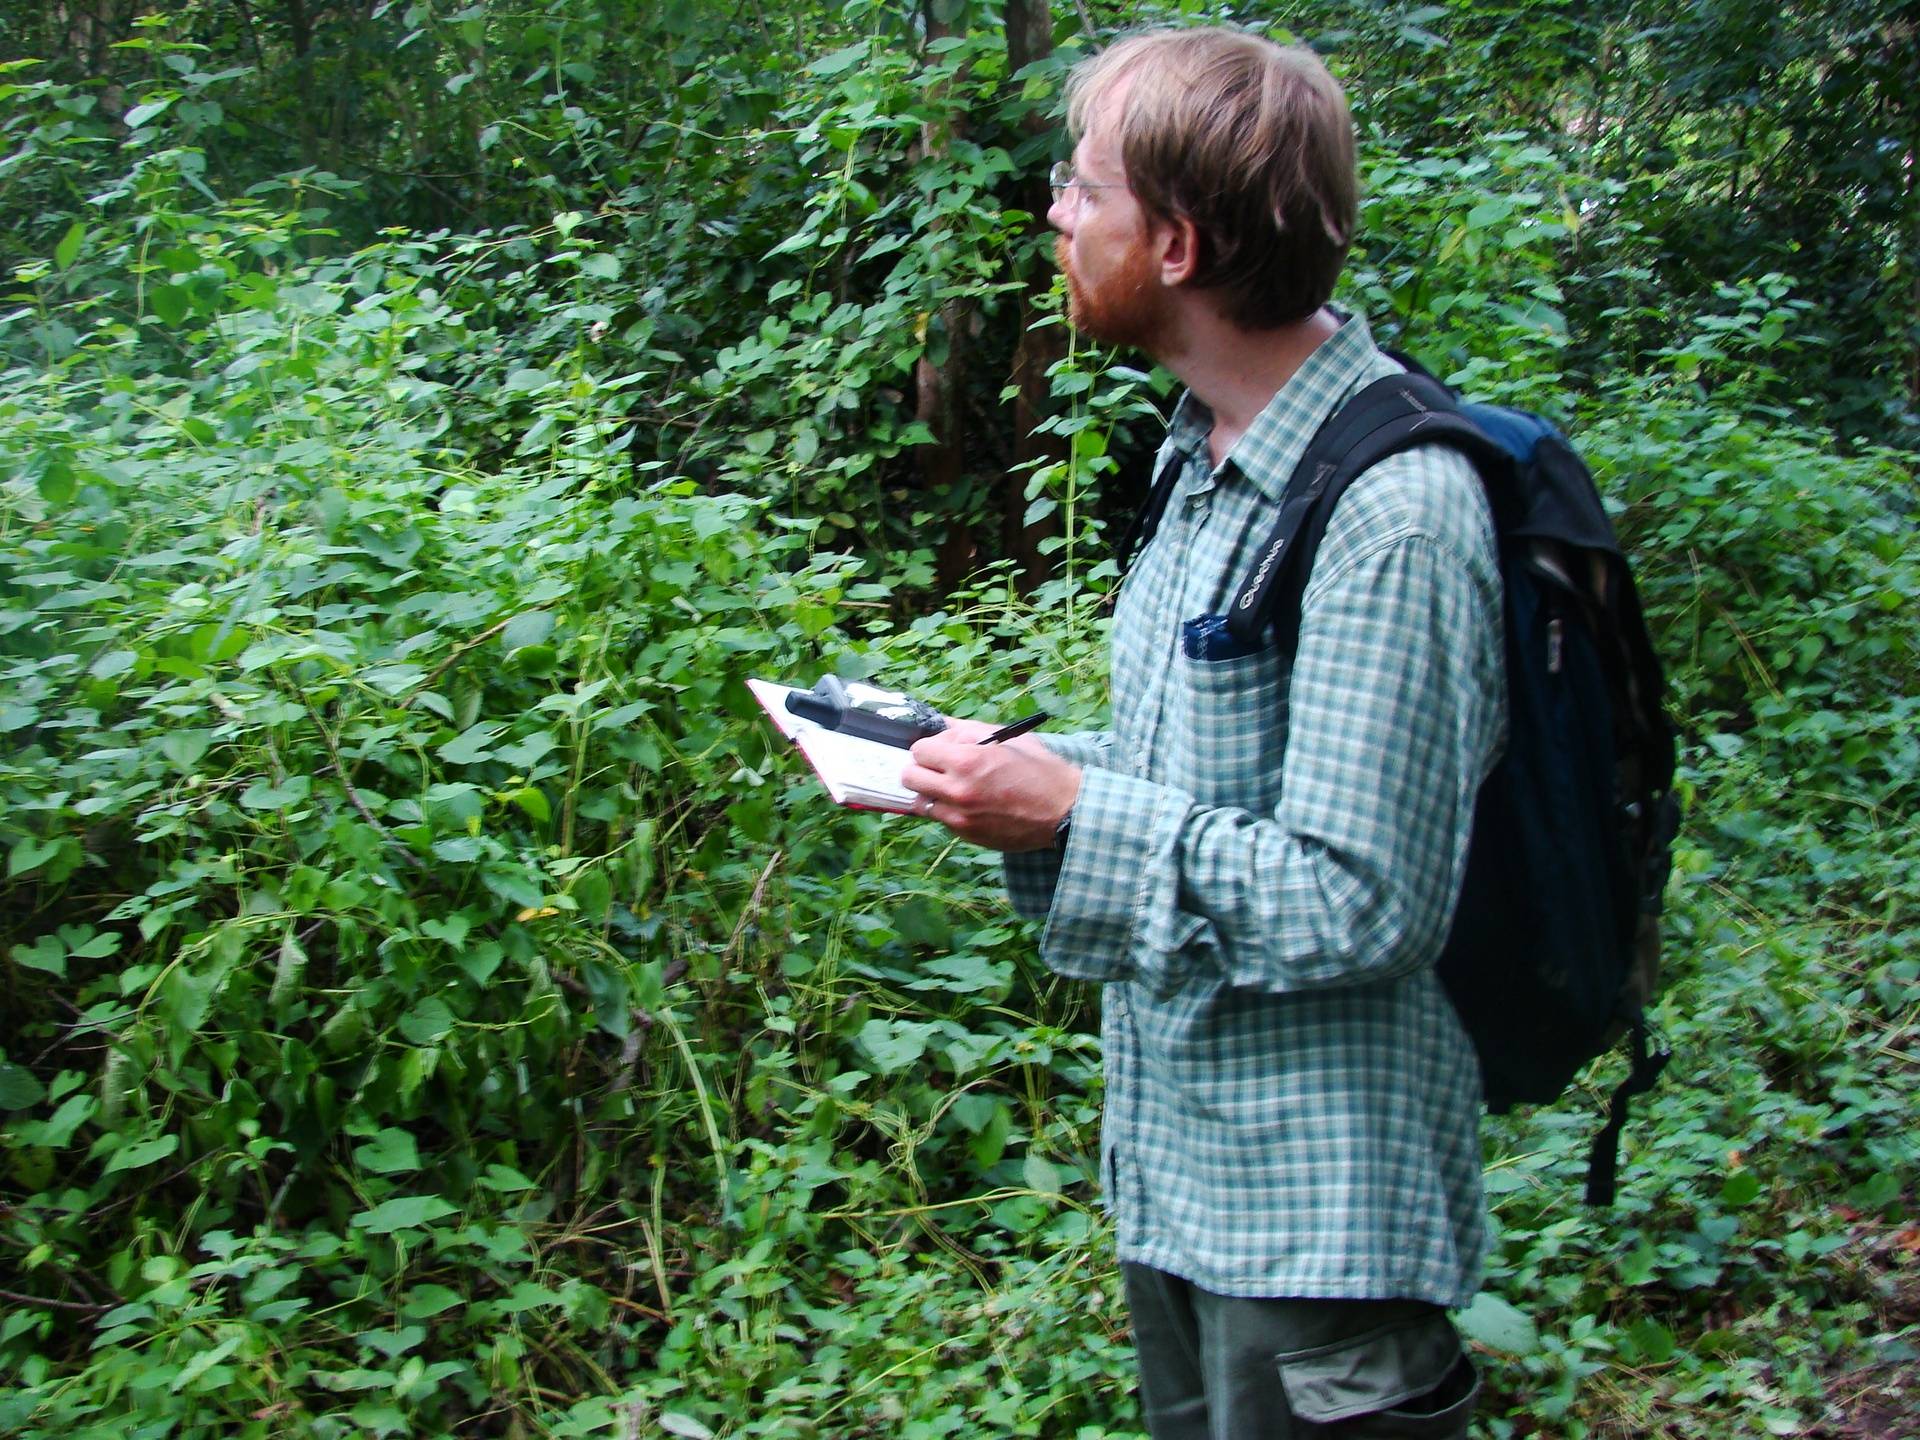 JB Leca looking for ebony langurs during a transect survey in the Prapat Agung peninsula, West Bali National Park (February 2010)